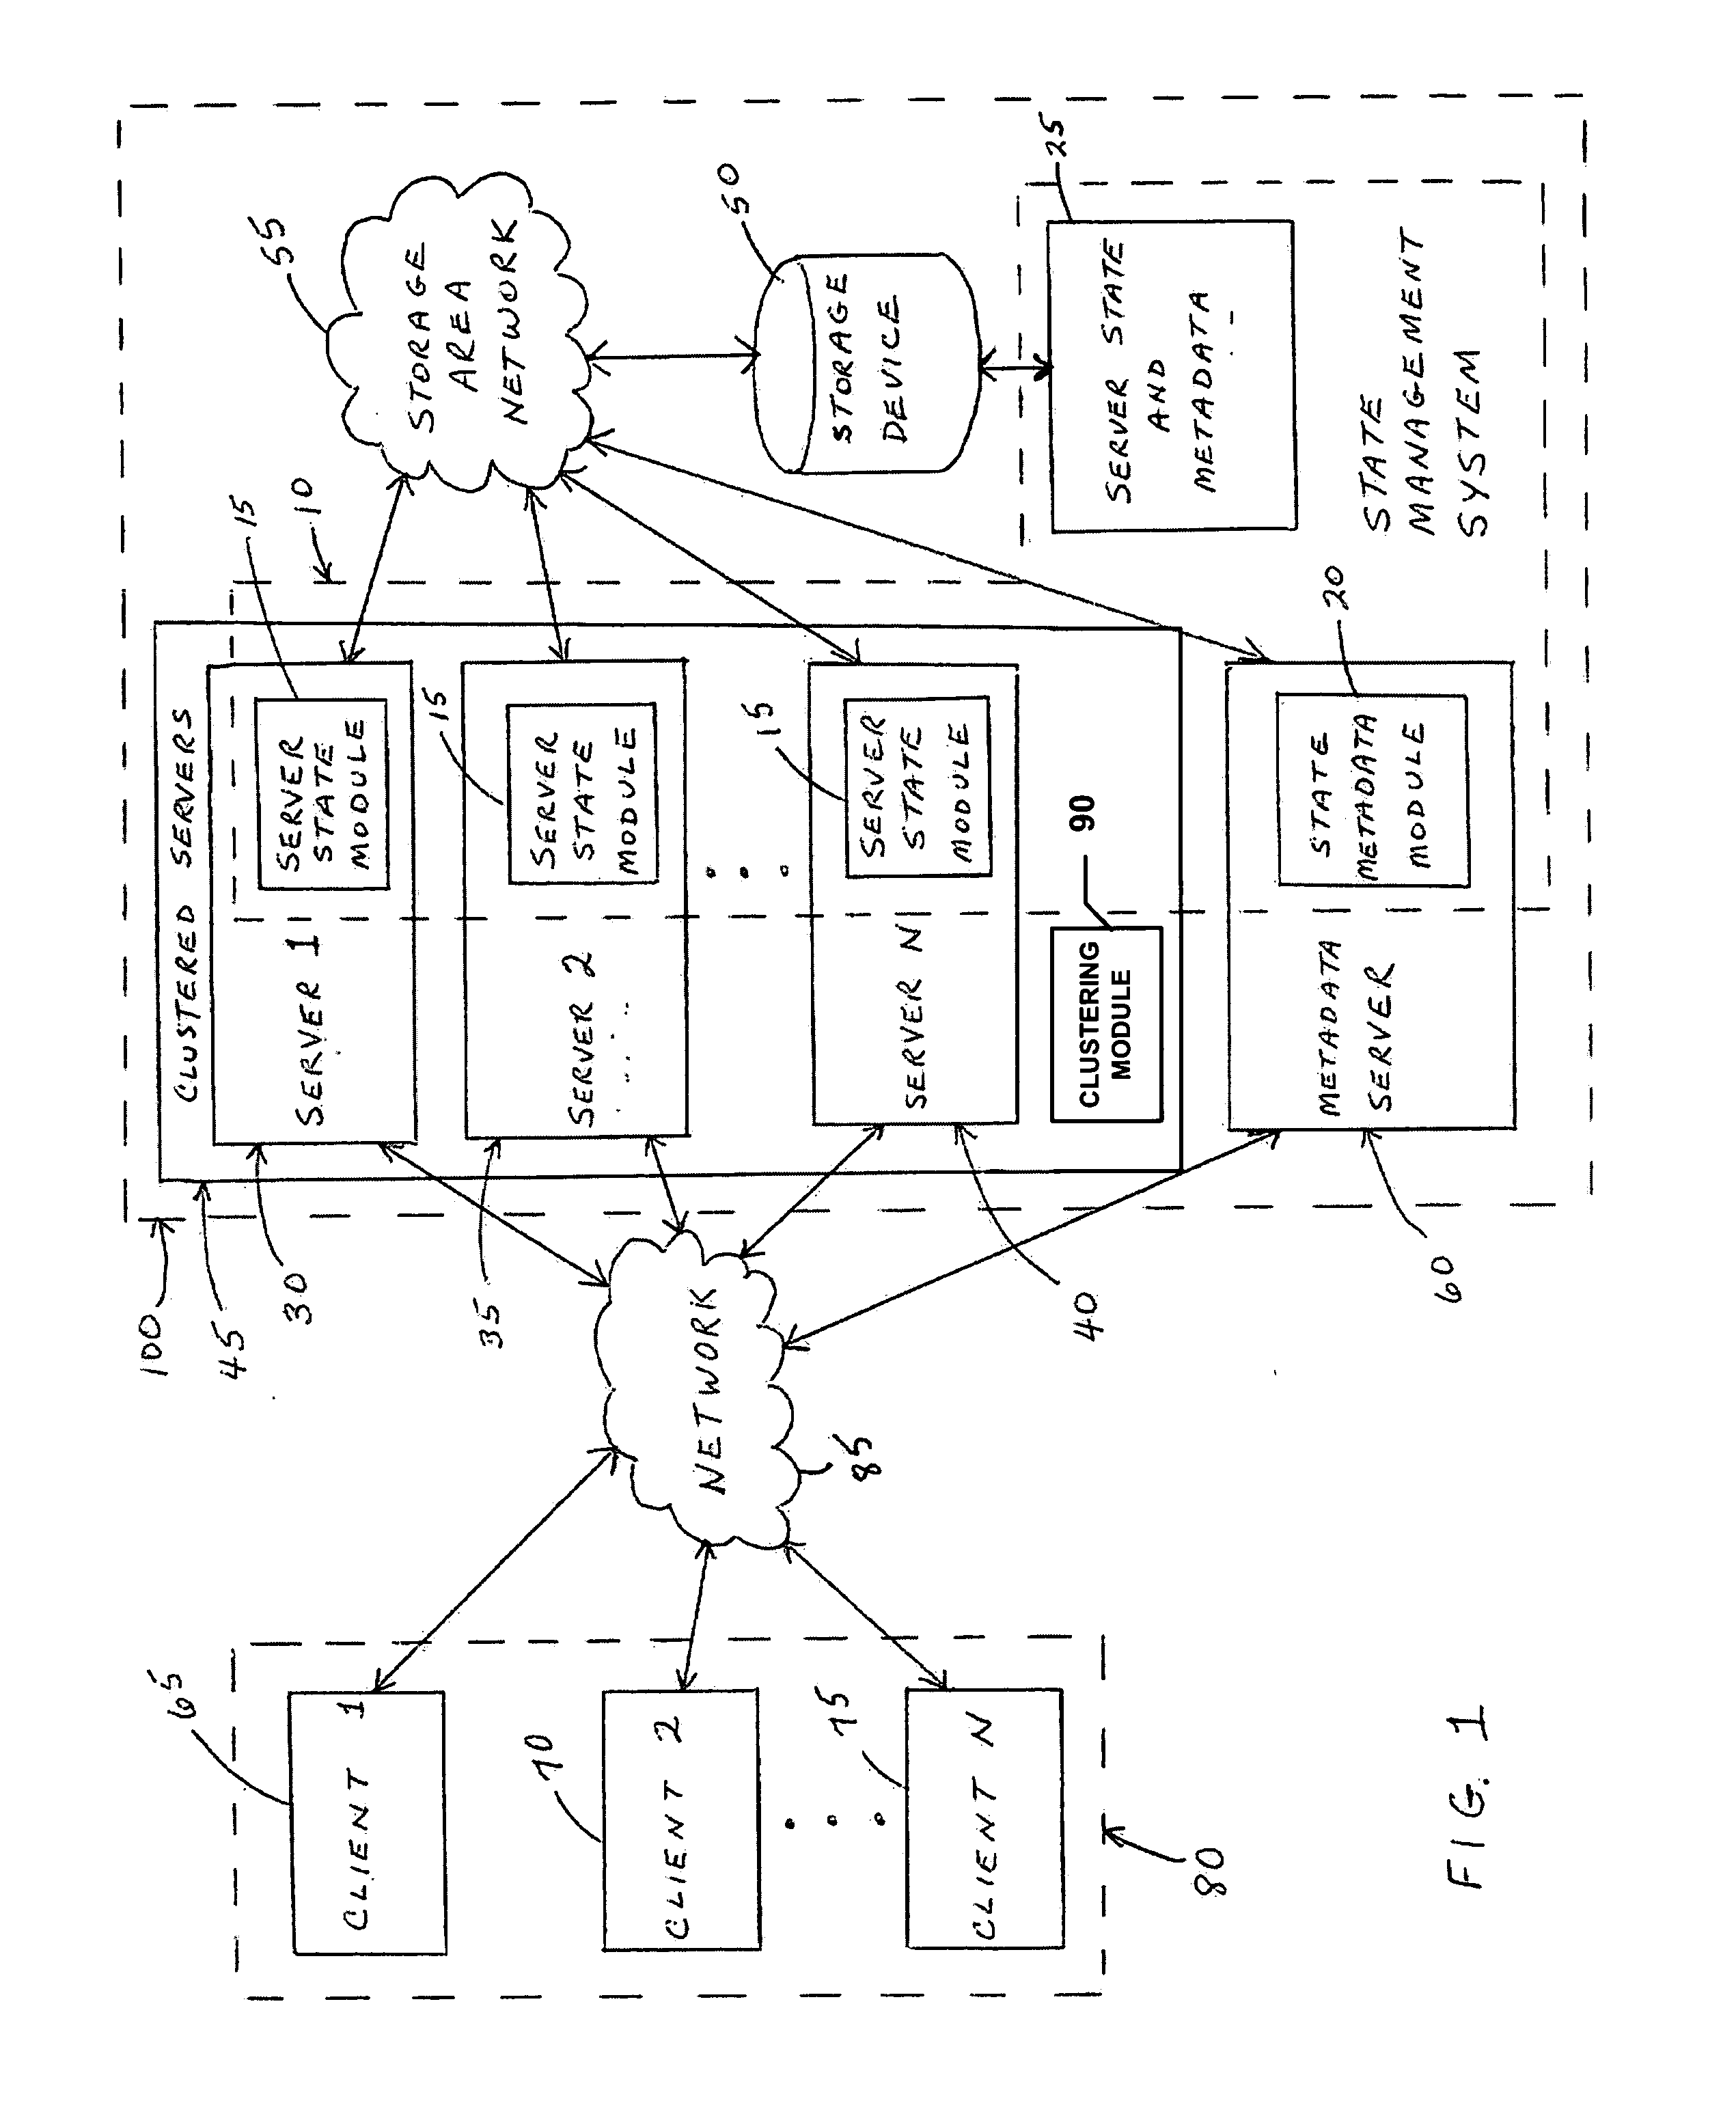 System and method for preserving state for a cluster of data servers in the presence of load-balancing, failover, and fail-back events